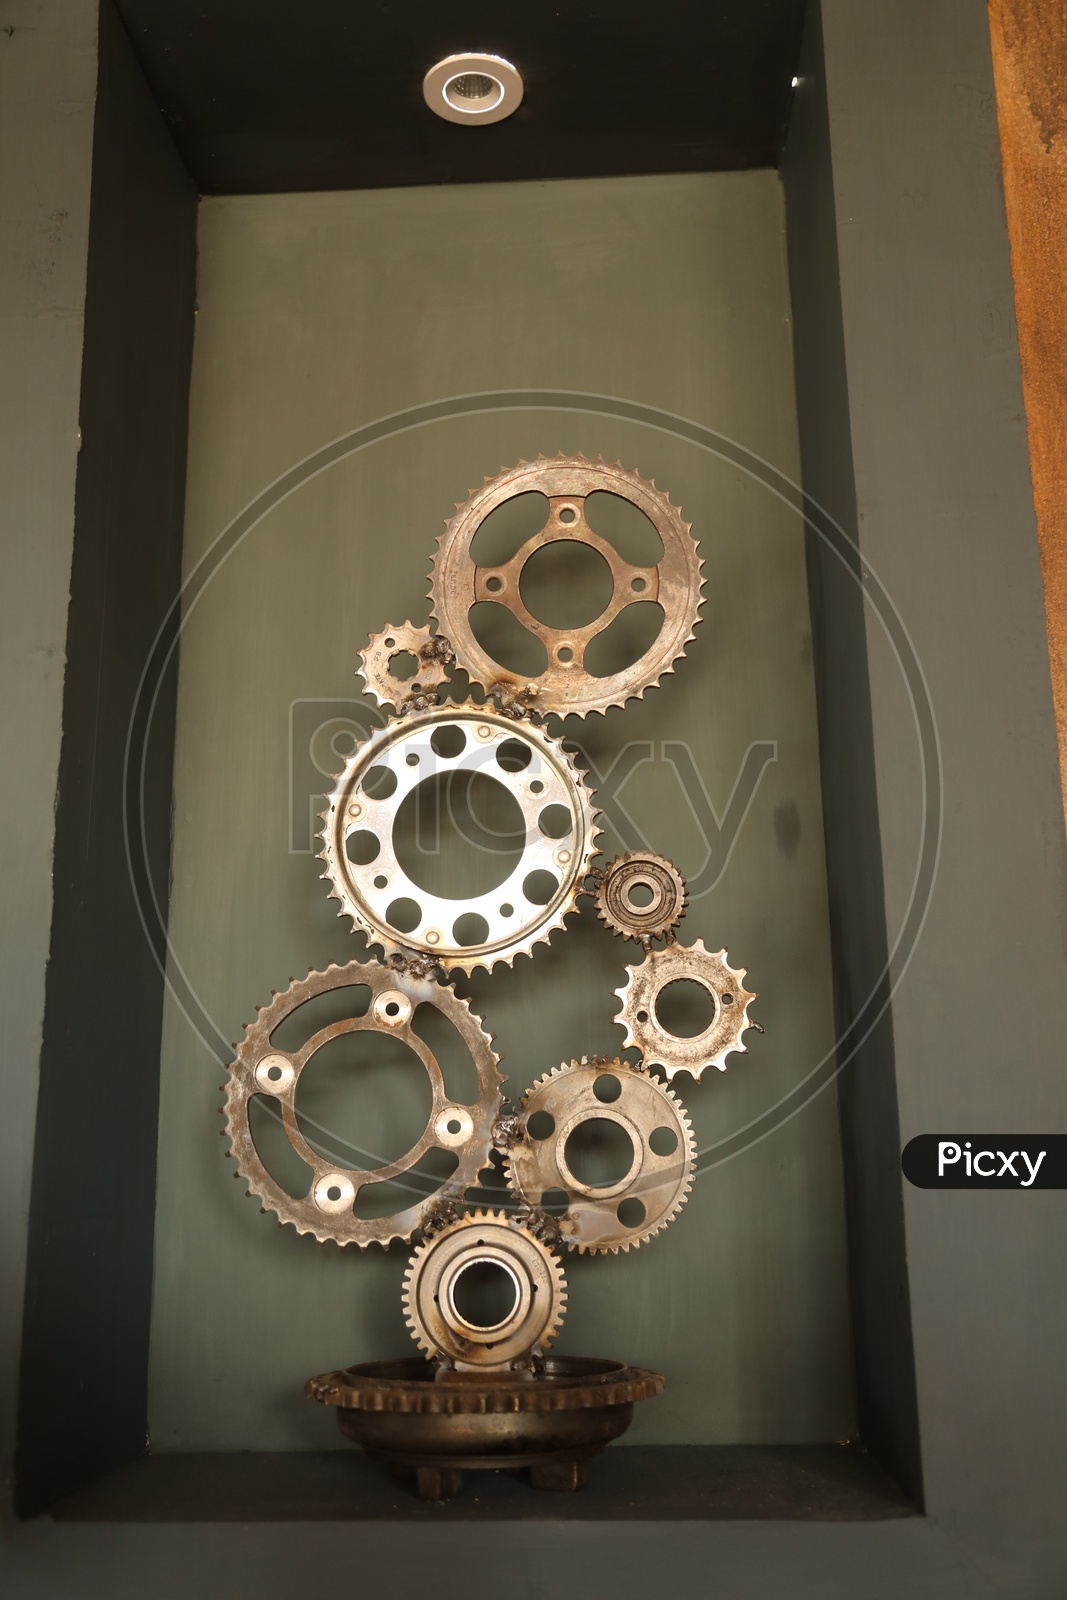 Interior Design Of a Room With Gear Wheels